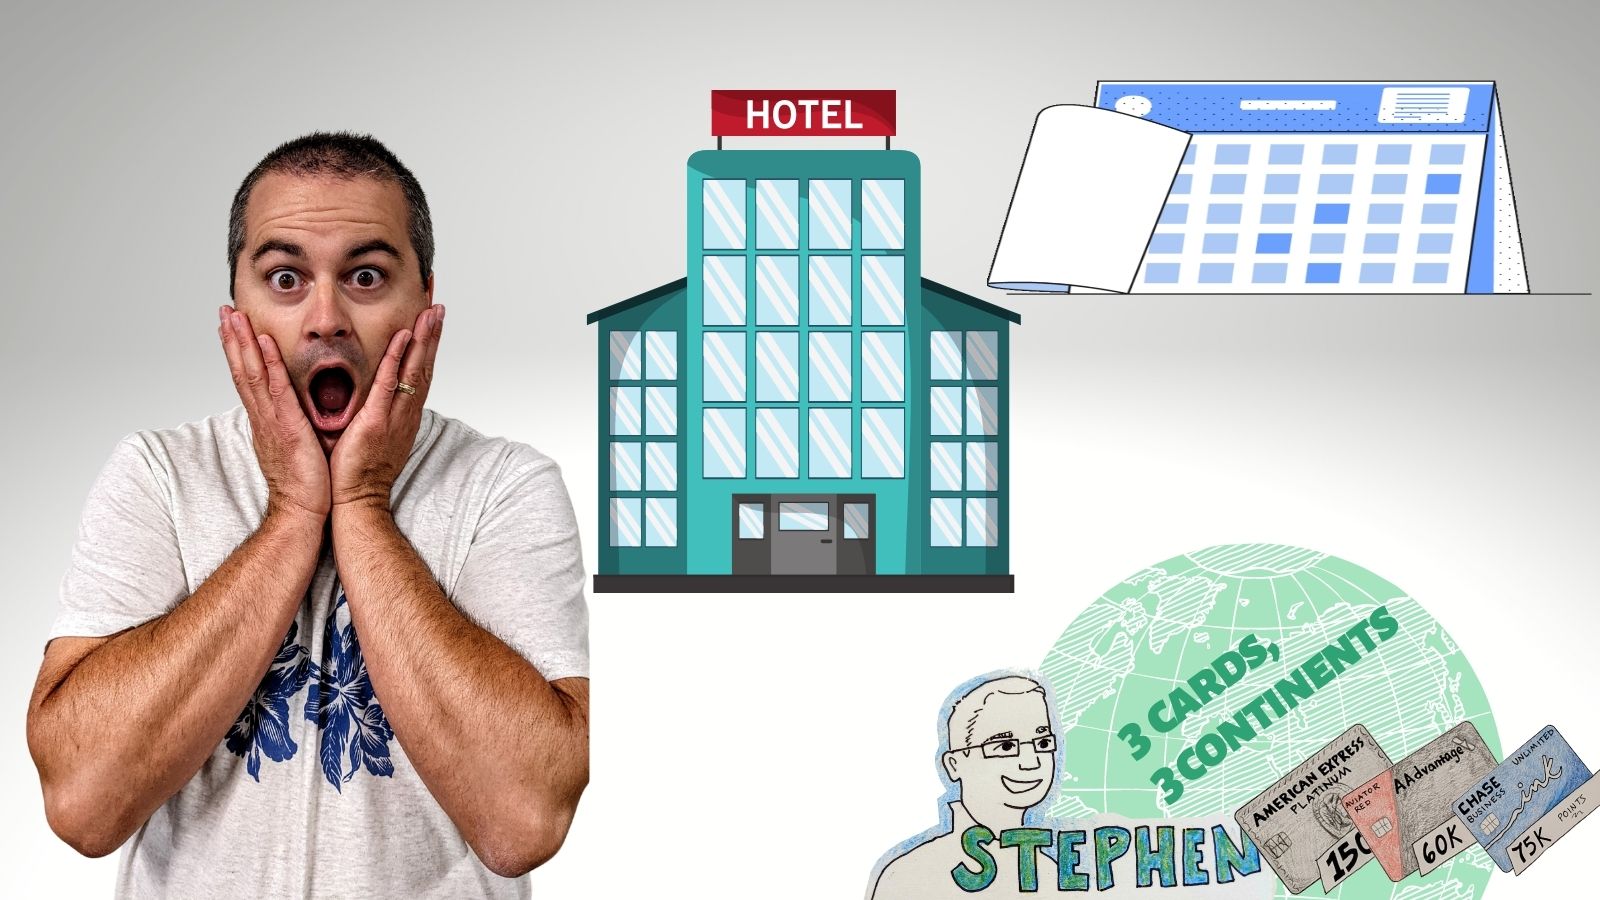 a man with his mouth open and a hotel